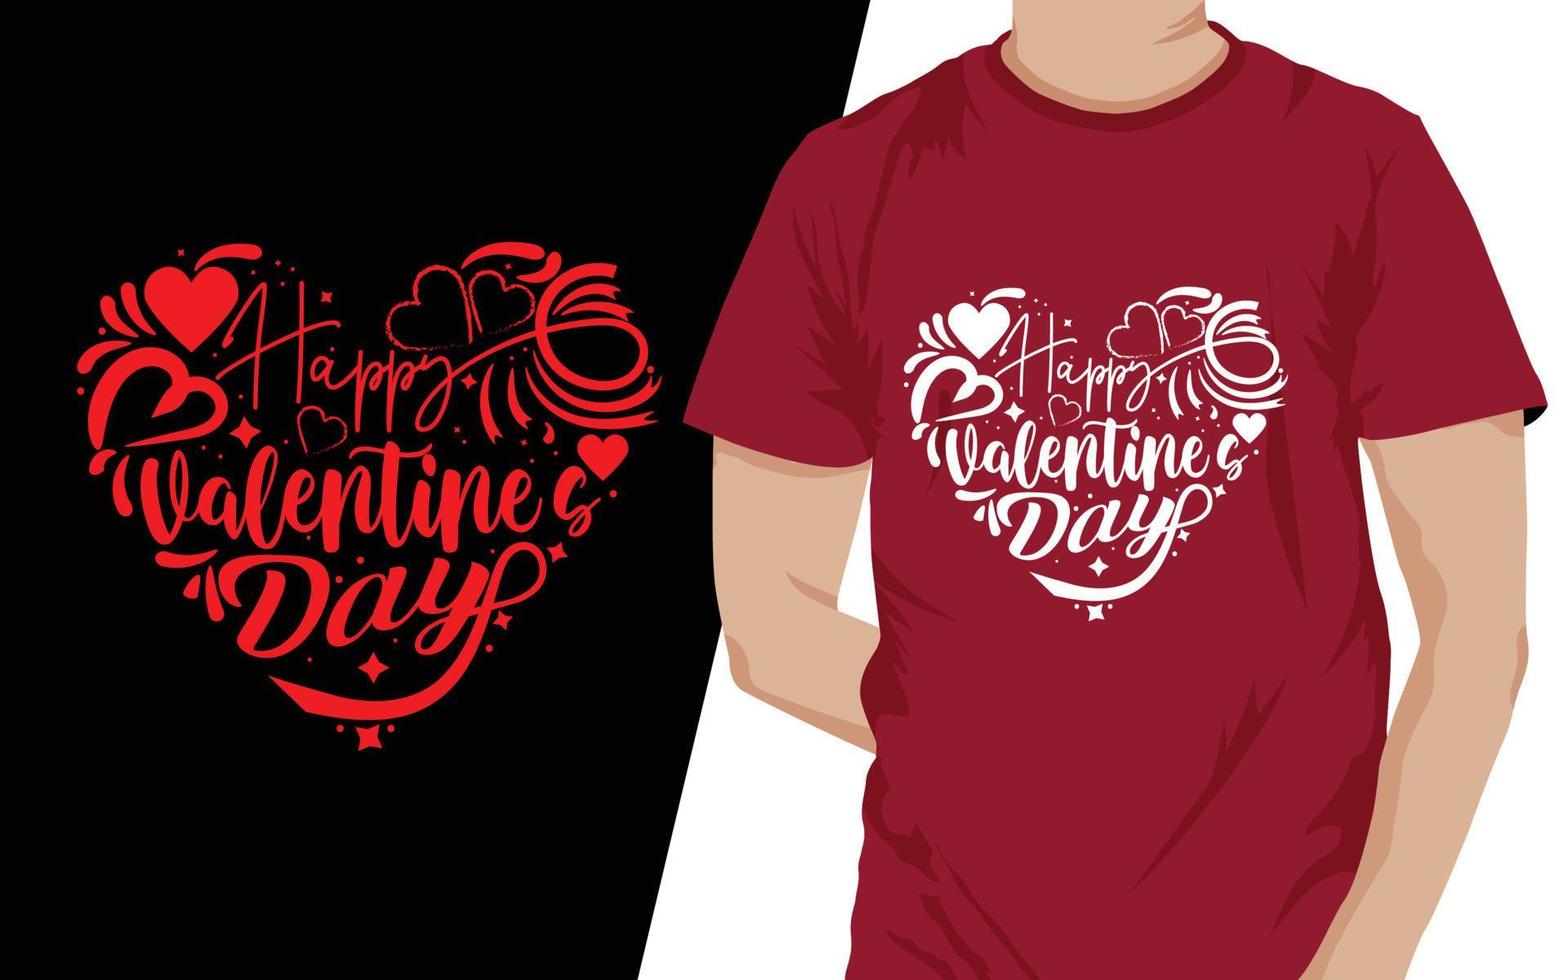 Happy Valentine's Day Svg Cut File, Valentines Eps, Happy Love Day Vector, Design Space, Craft File, Cut File, Instant Download vektor